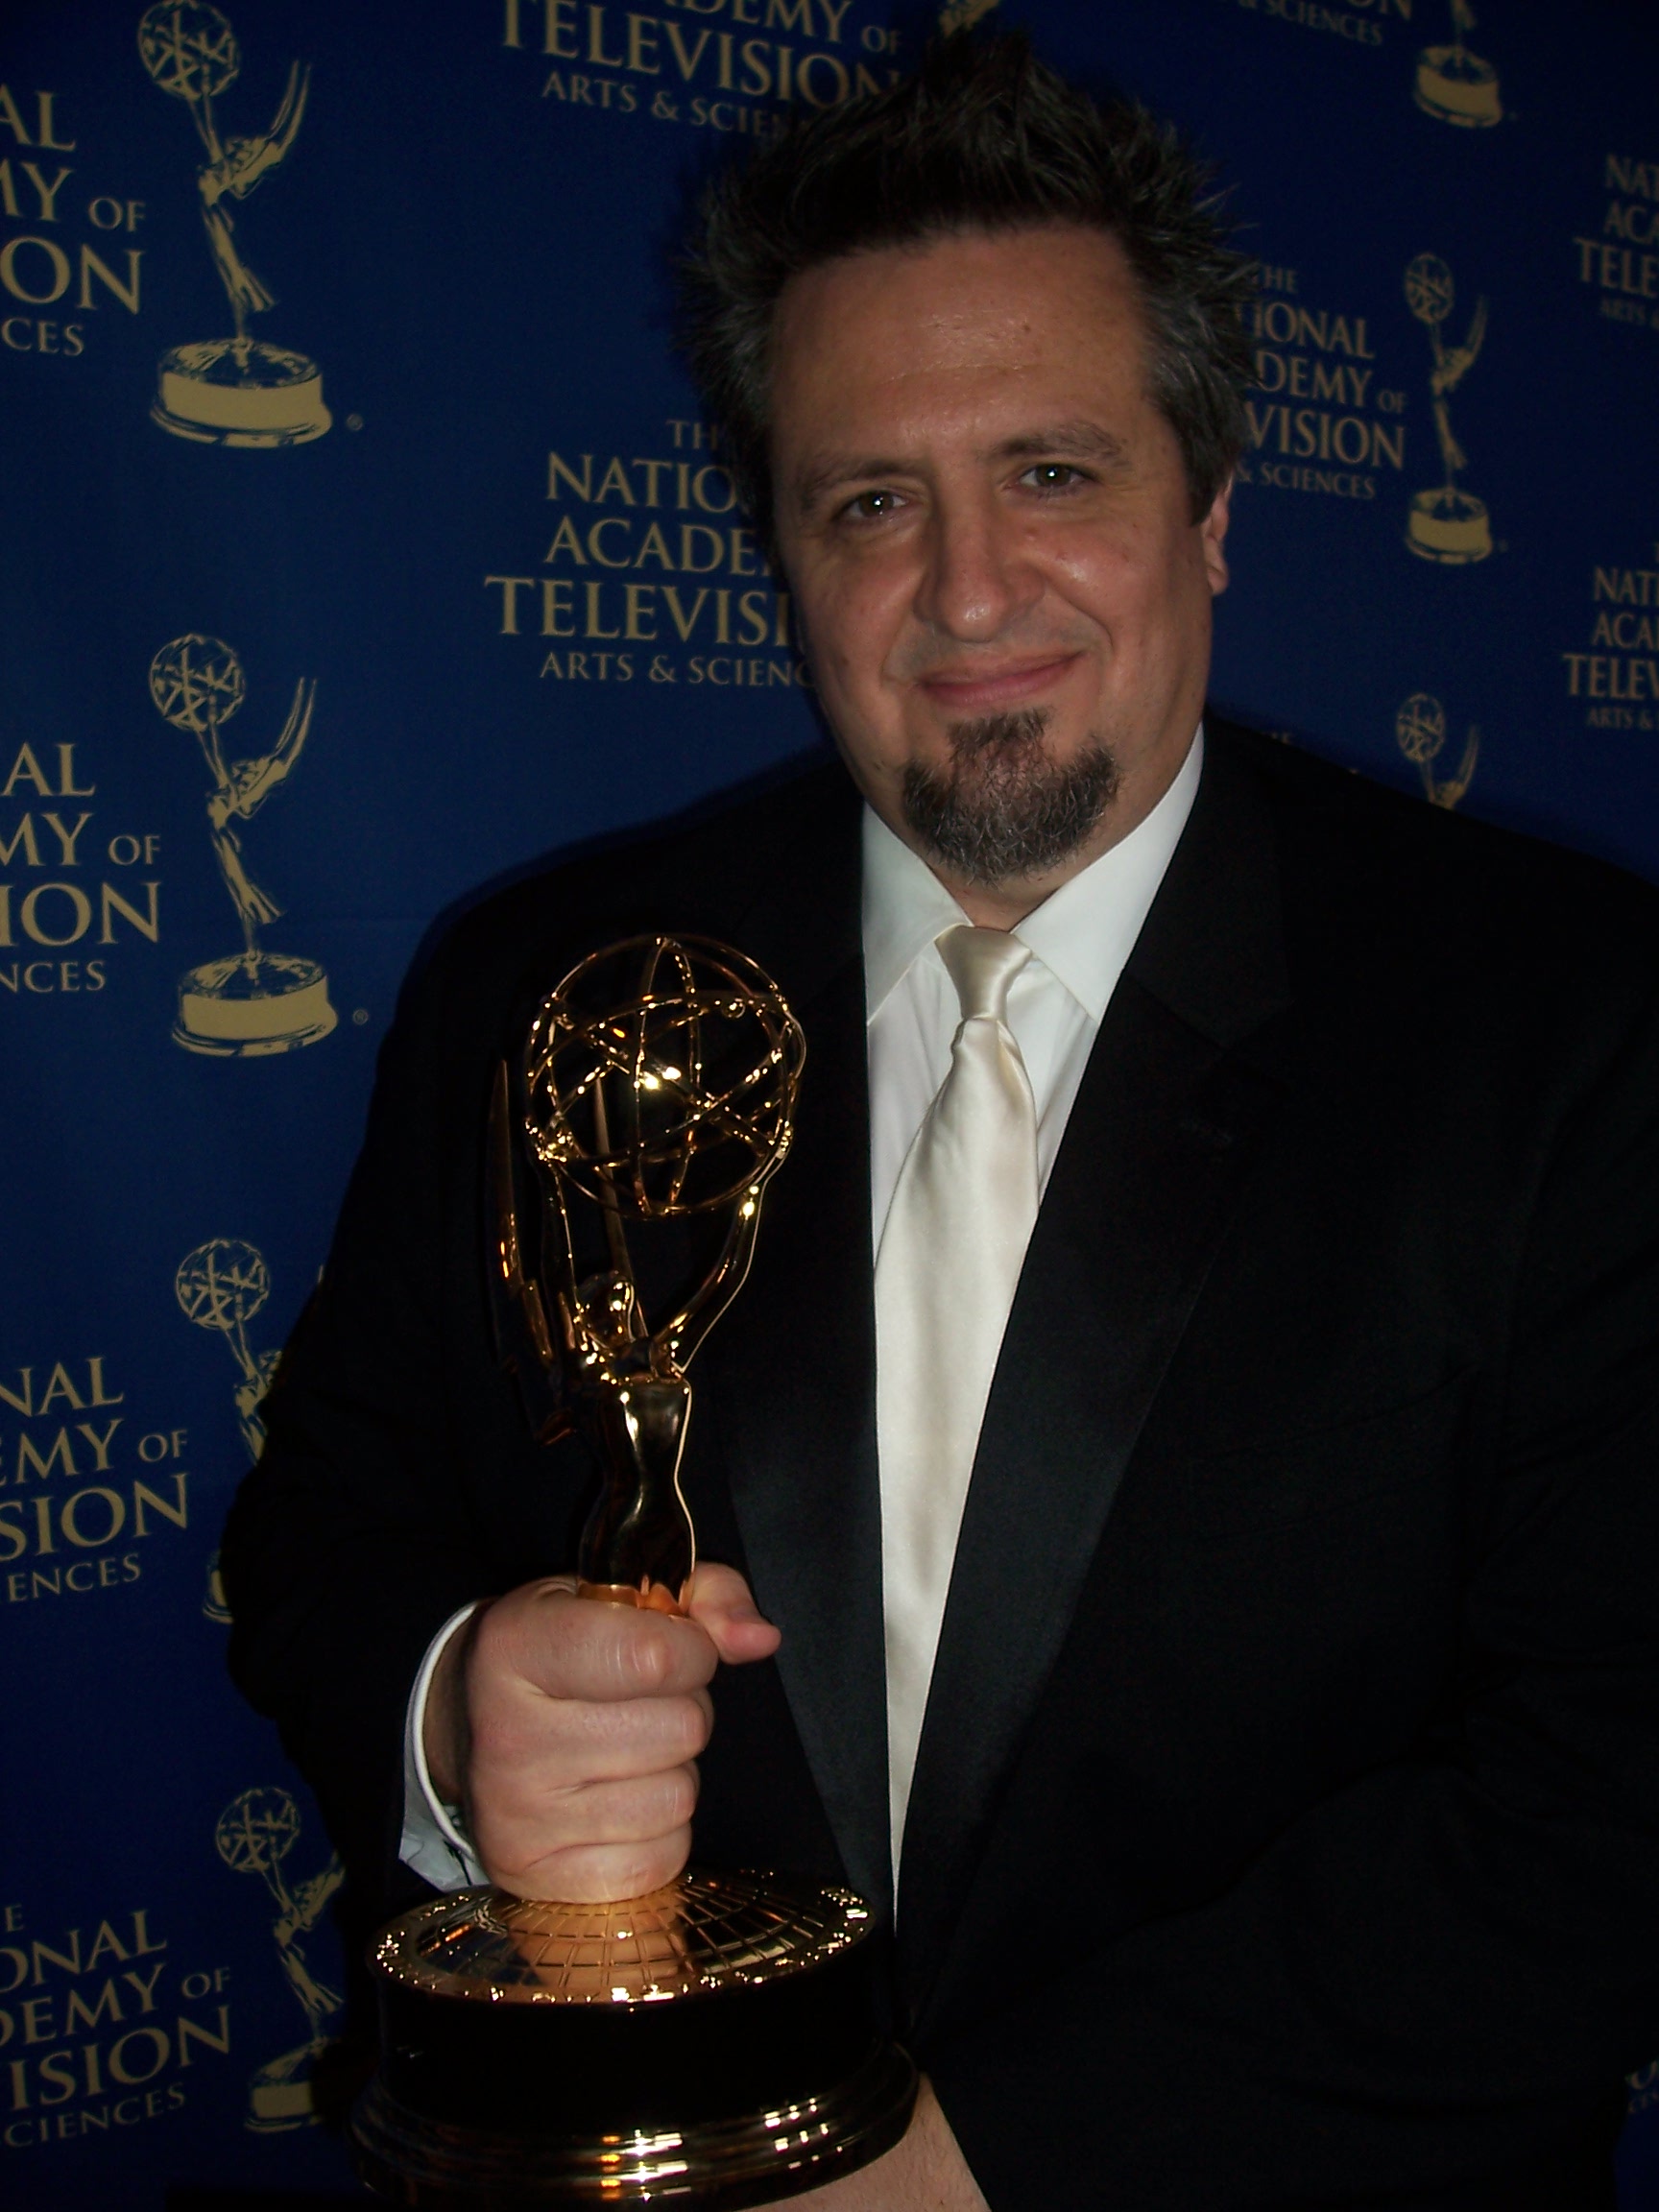 Winner, 2014 Daytime Emmy for Outstanding Writing for Animated Television